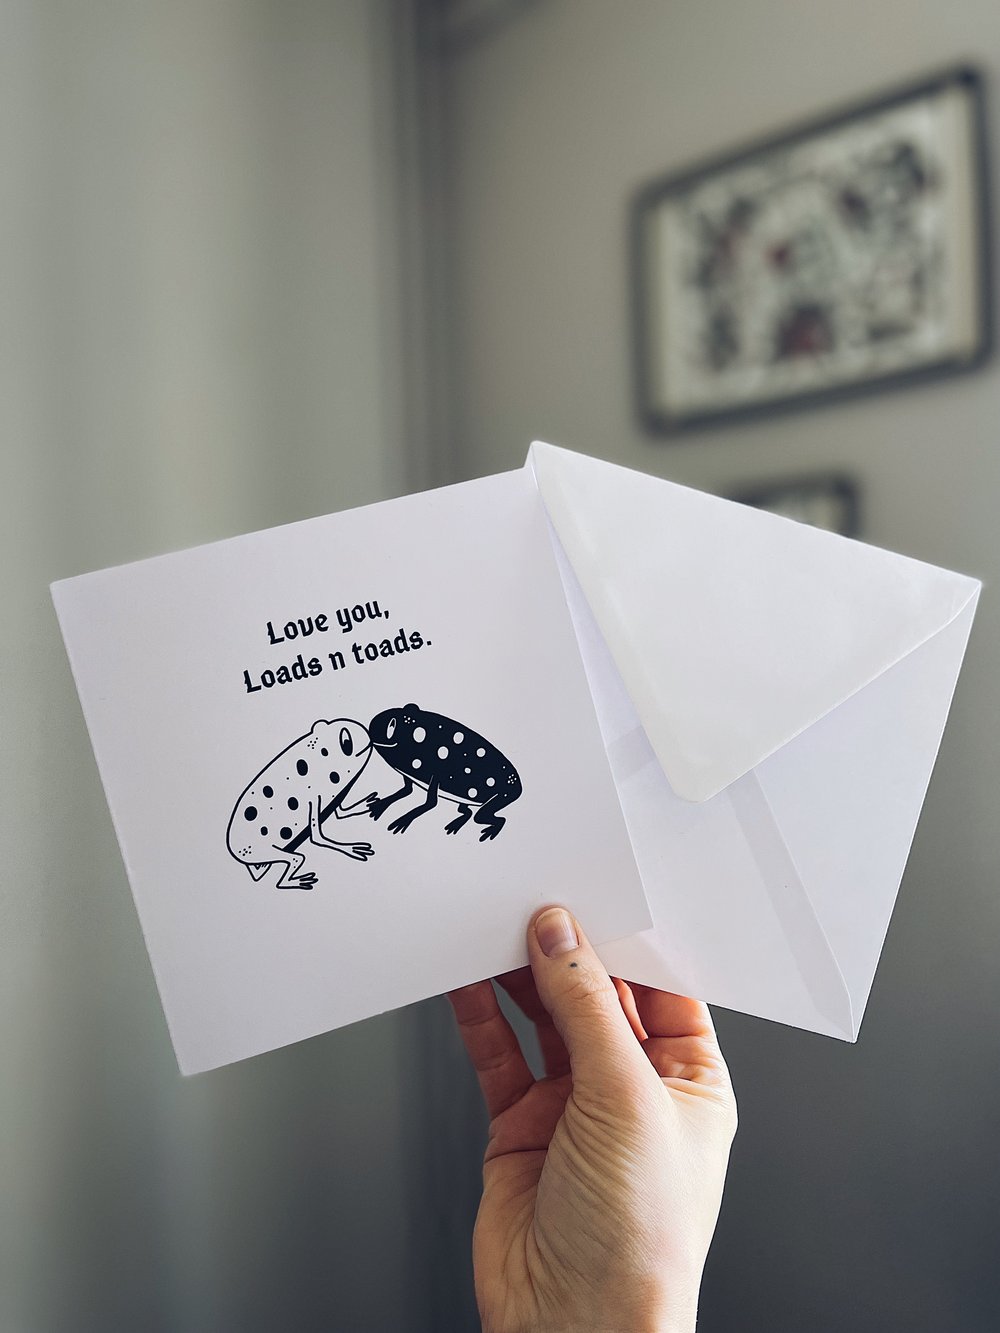 Loads and toads print or card